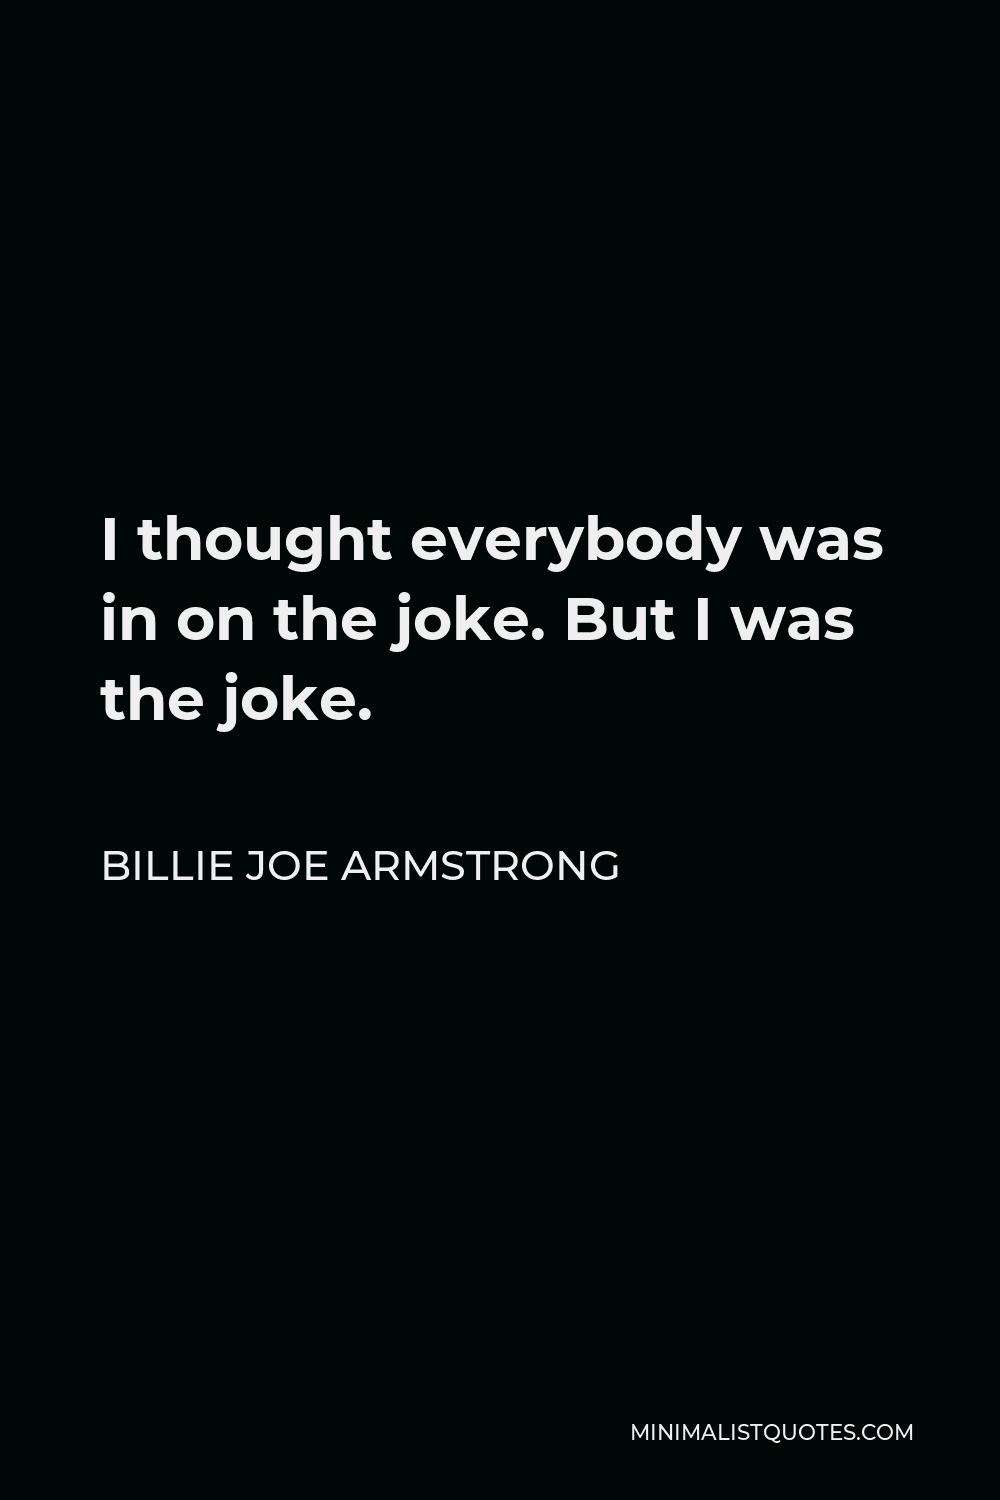 Billie Joe Armstrong Quote - I thought everybody was in on the joke. But I was the joke.